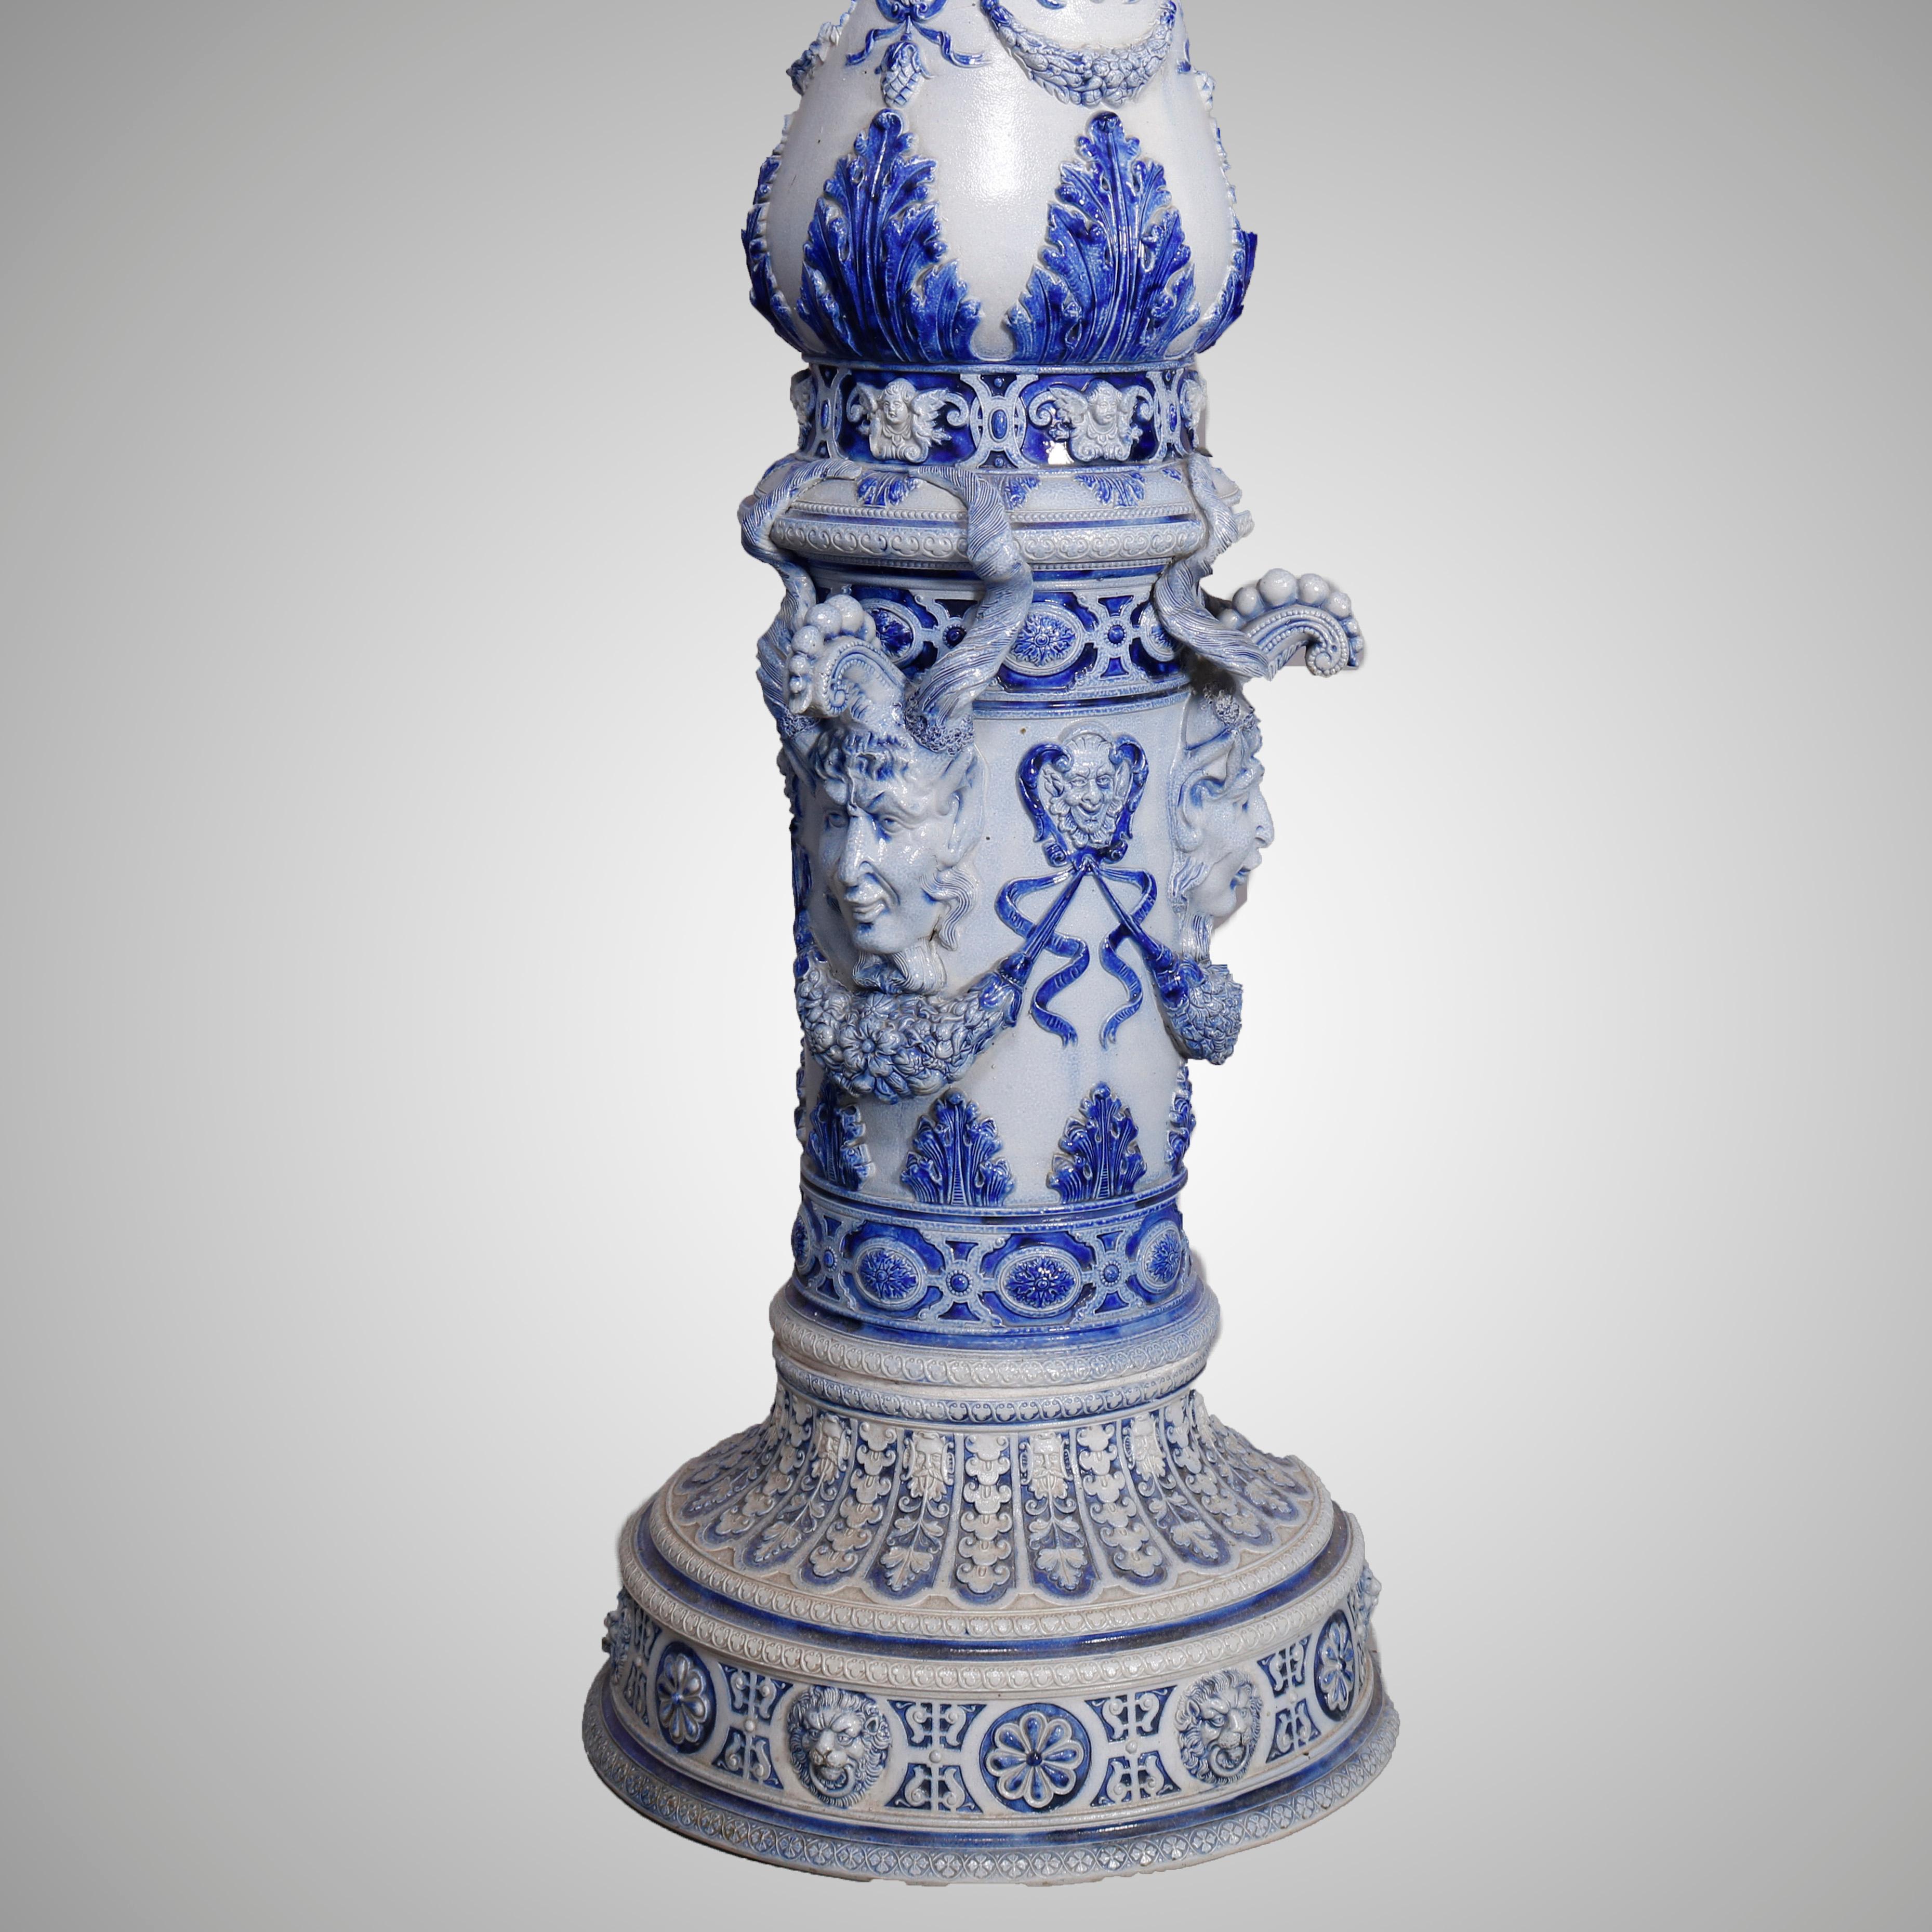 An antique German stoneware jardinière and pedestal offer blue and white stoneware construction with urn form planter offers high relief neoclassical scenes including cherubs, female masks and foliate elements flanked by figural handles and raised